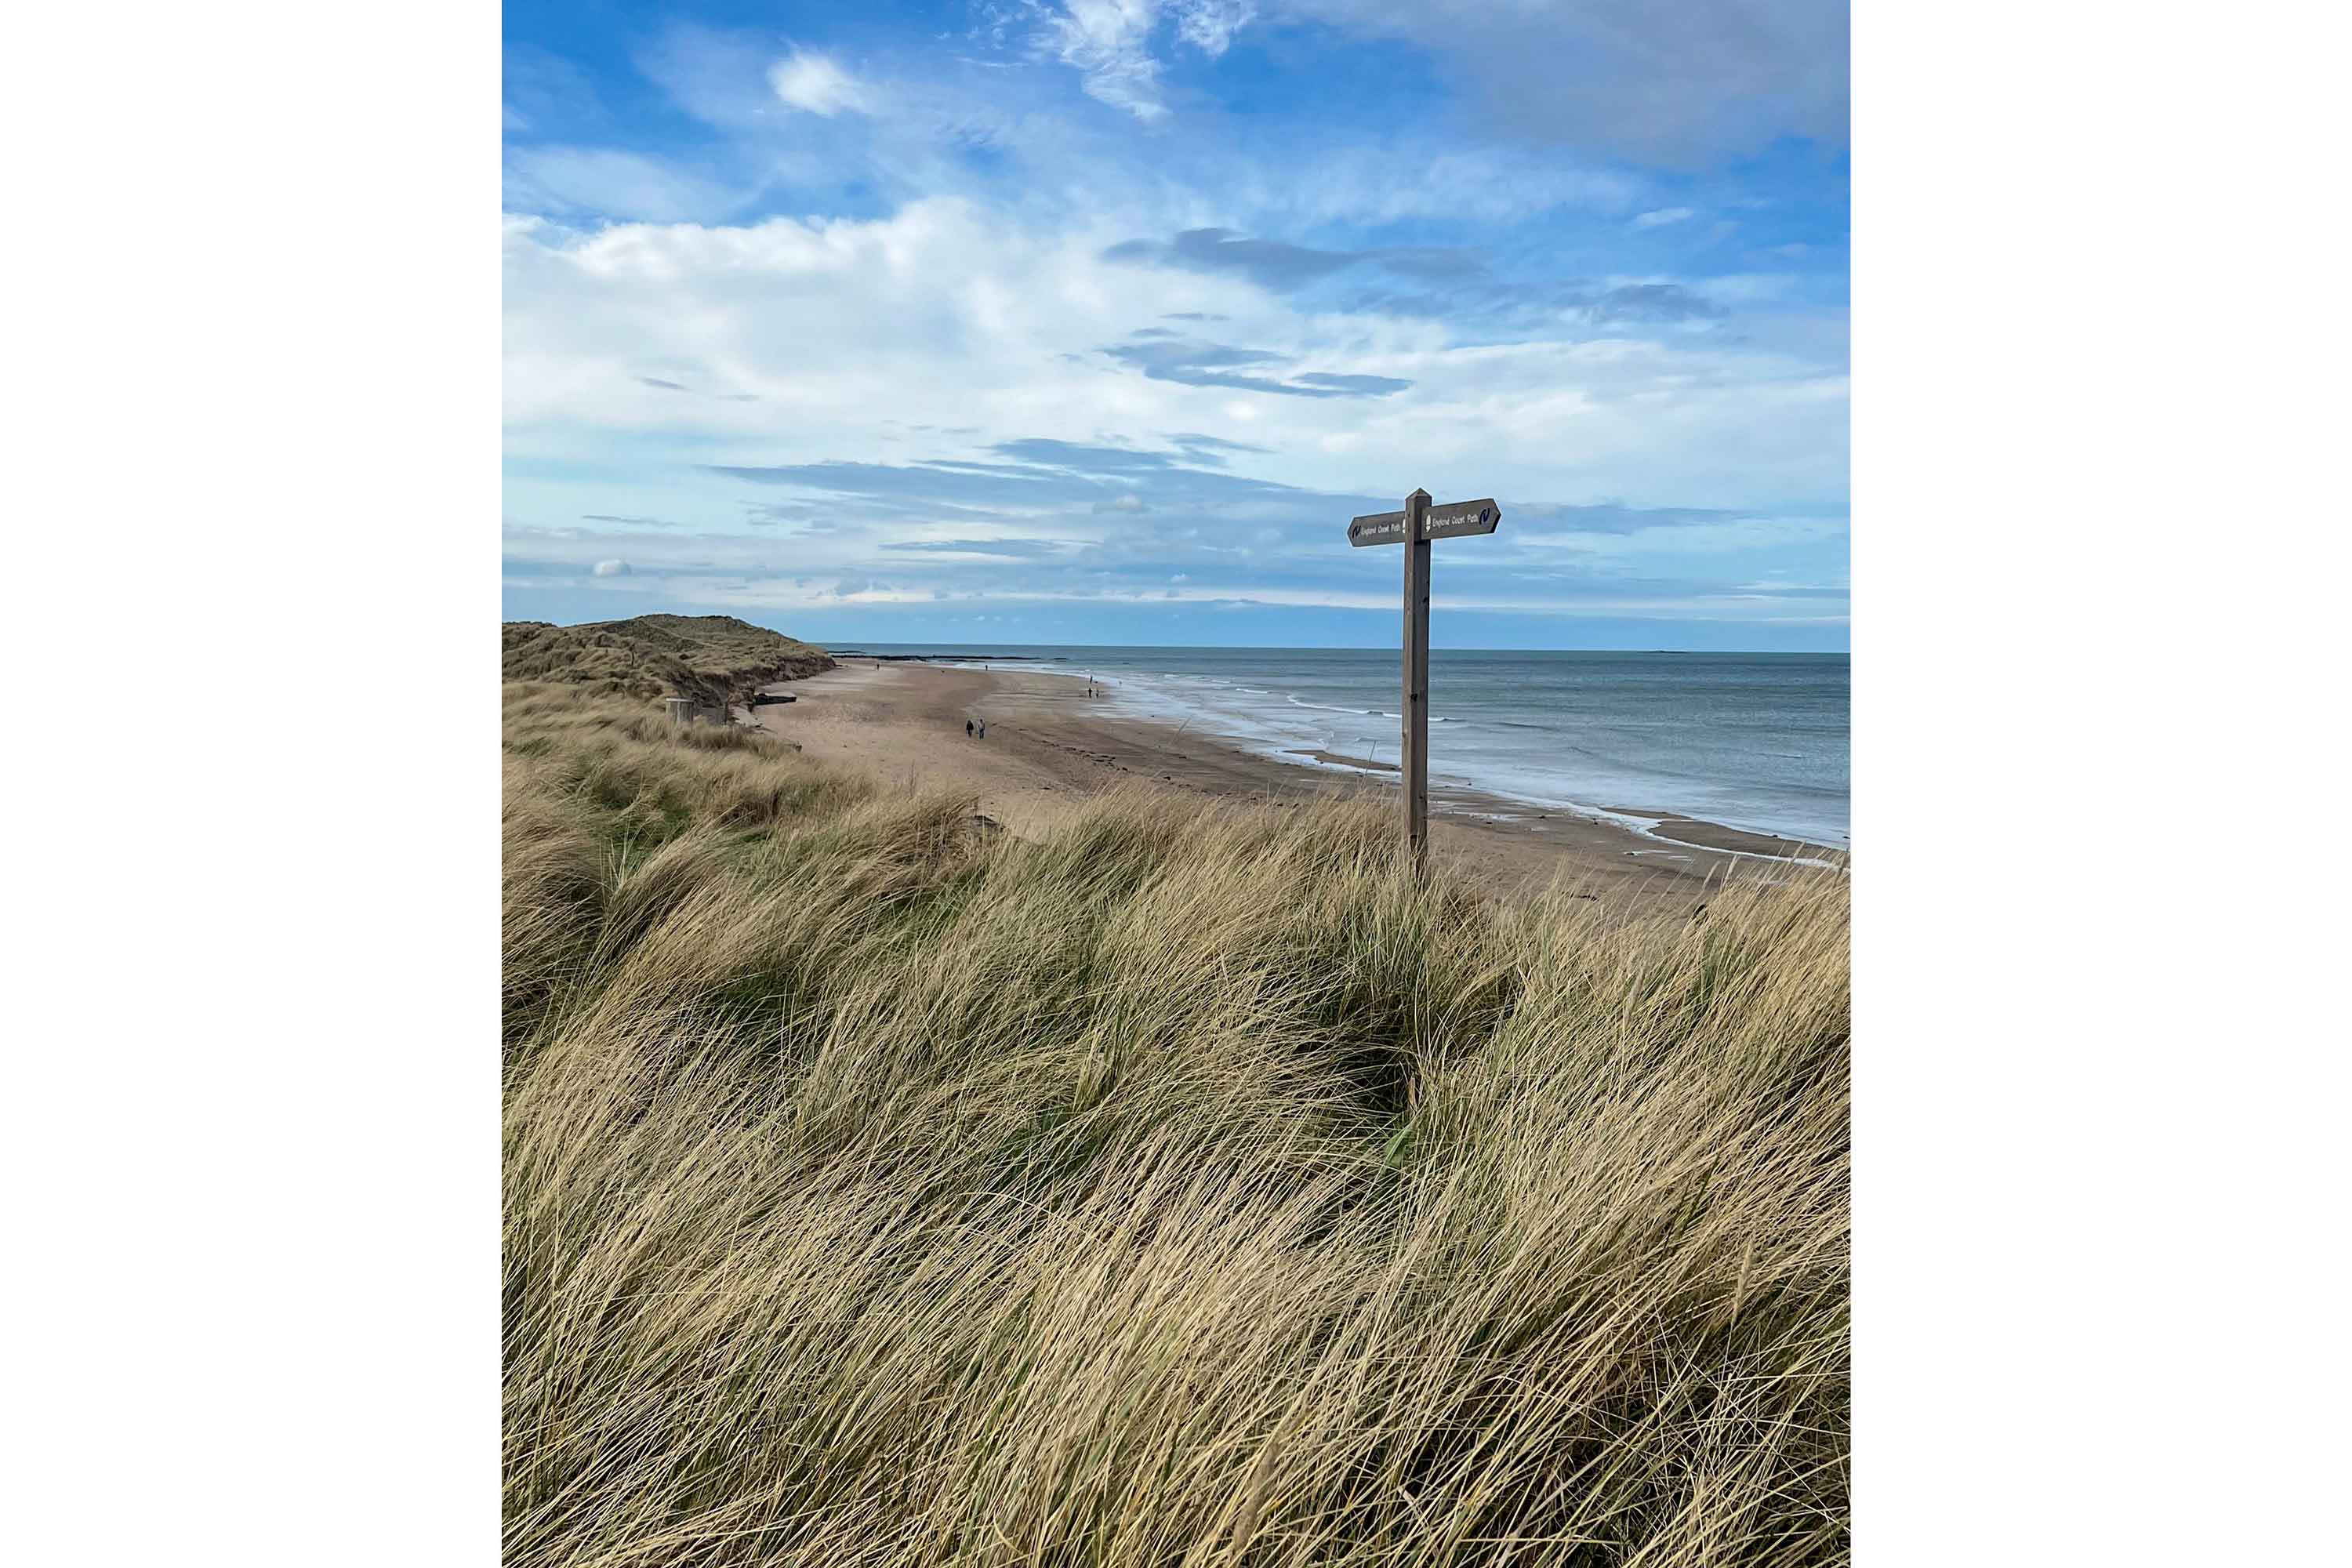 Coastal grass blowing in the wind with a wooden signpost, beach and blue sky with wispy clouds